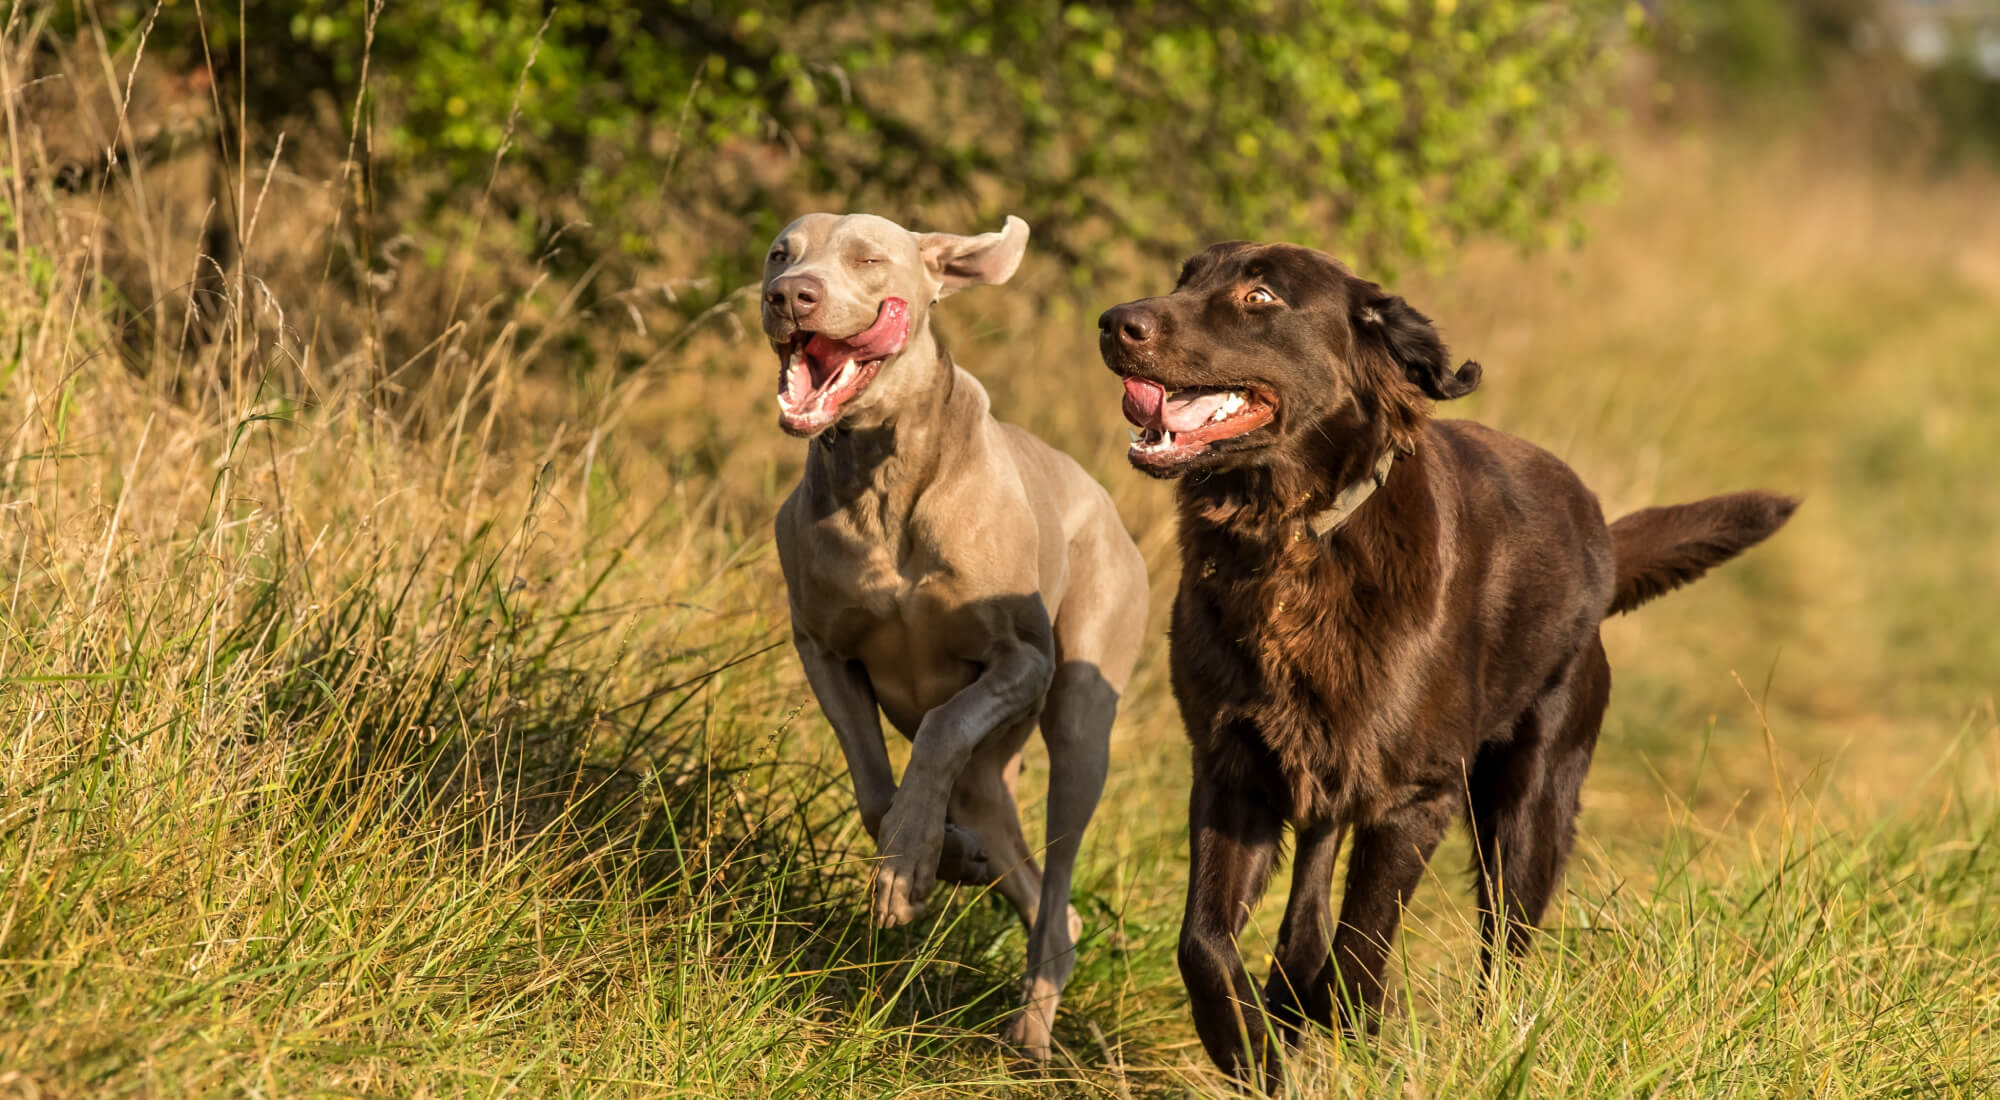 Chester the Dog running with friend in long grass